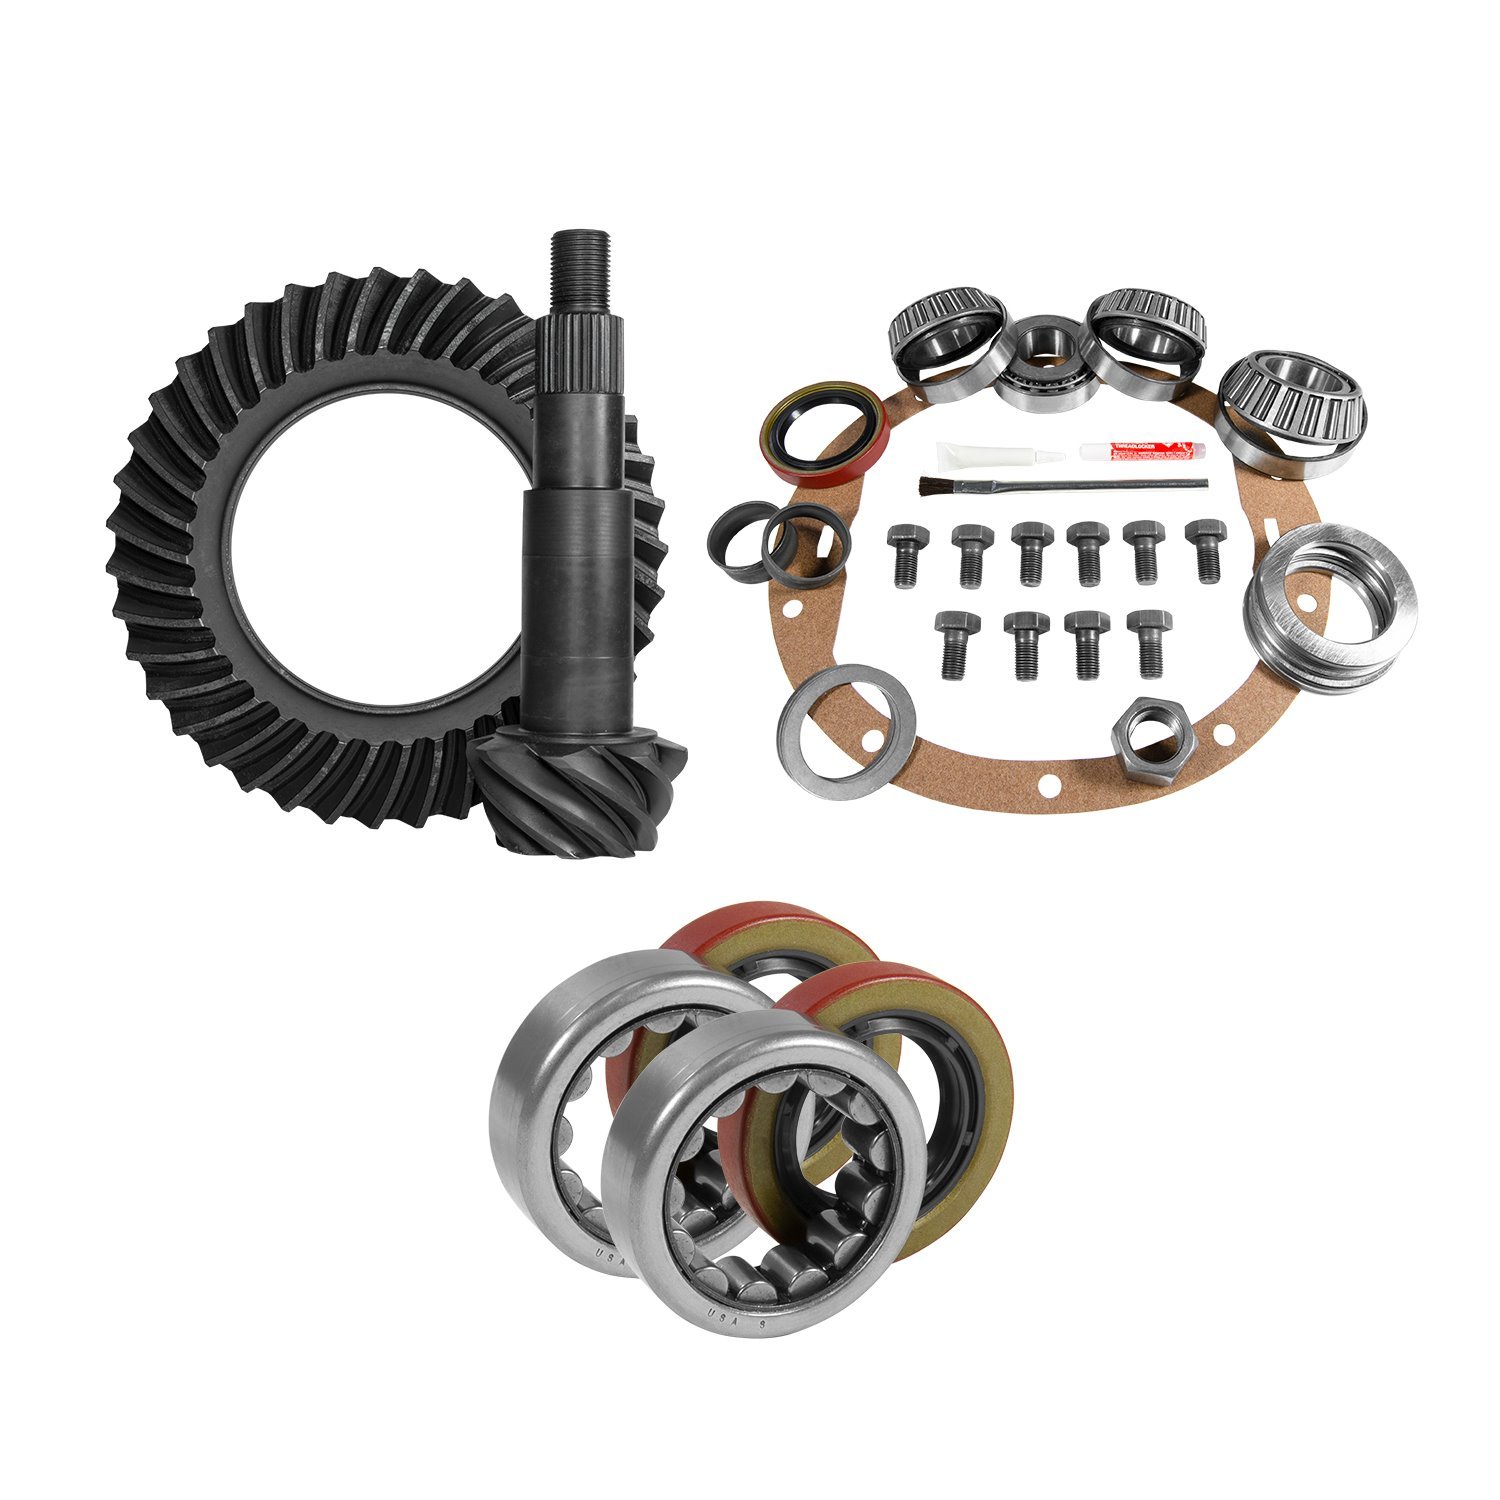 Muscle Car Re-Gear Kit For GM 8.5 in. Diff, 30 Spline, 3.42 Ratio